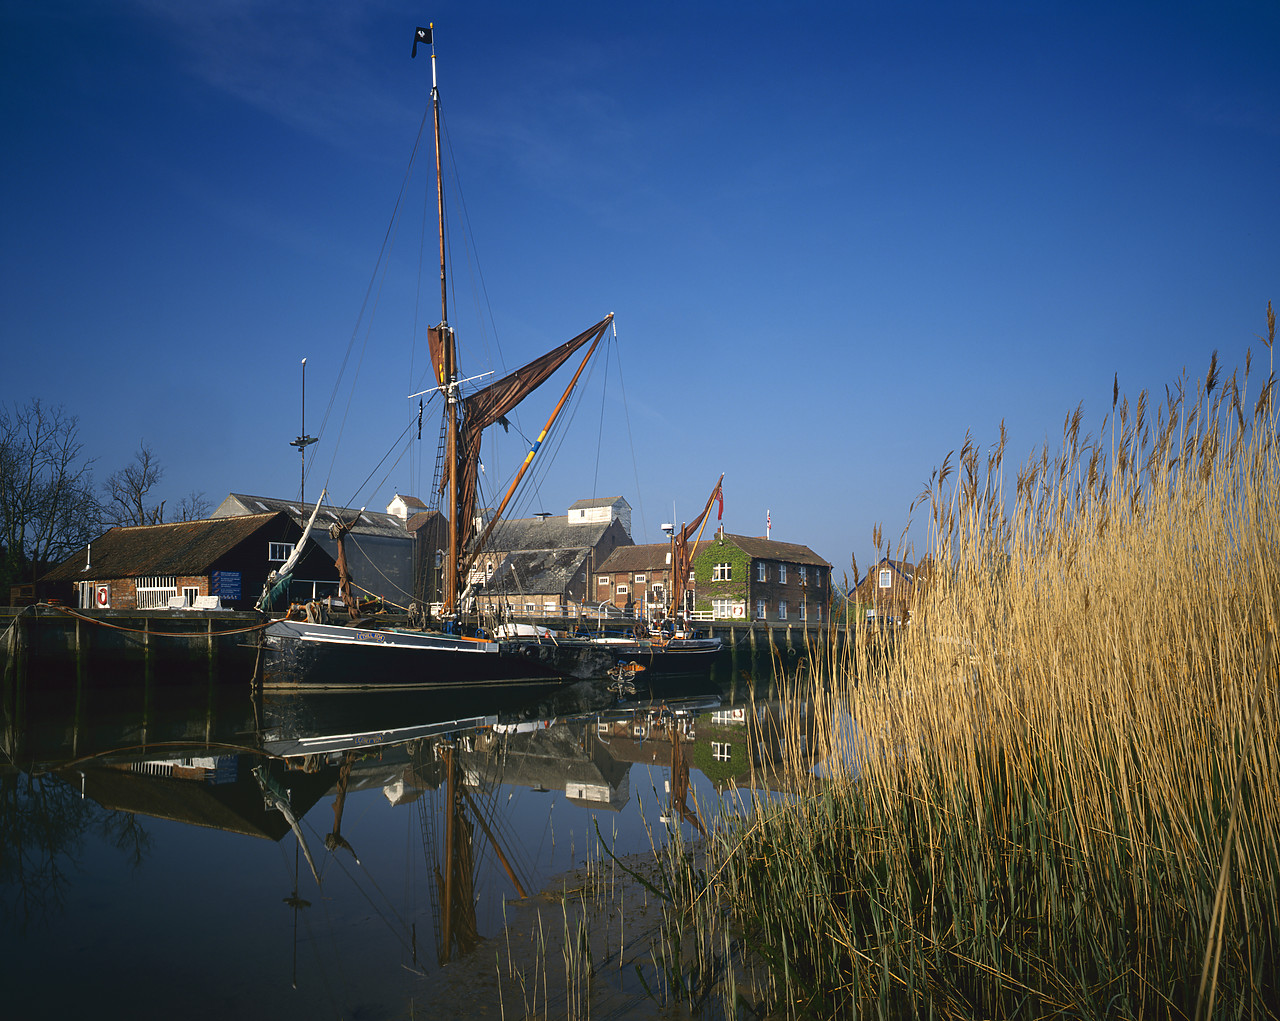 #955499-1 - Thames Barges, Snape Maltings, Suffolk, England